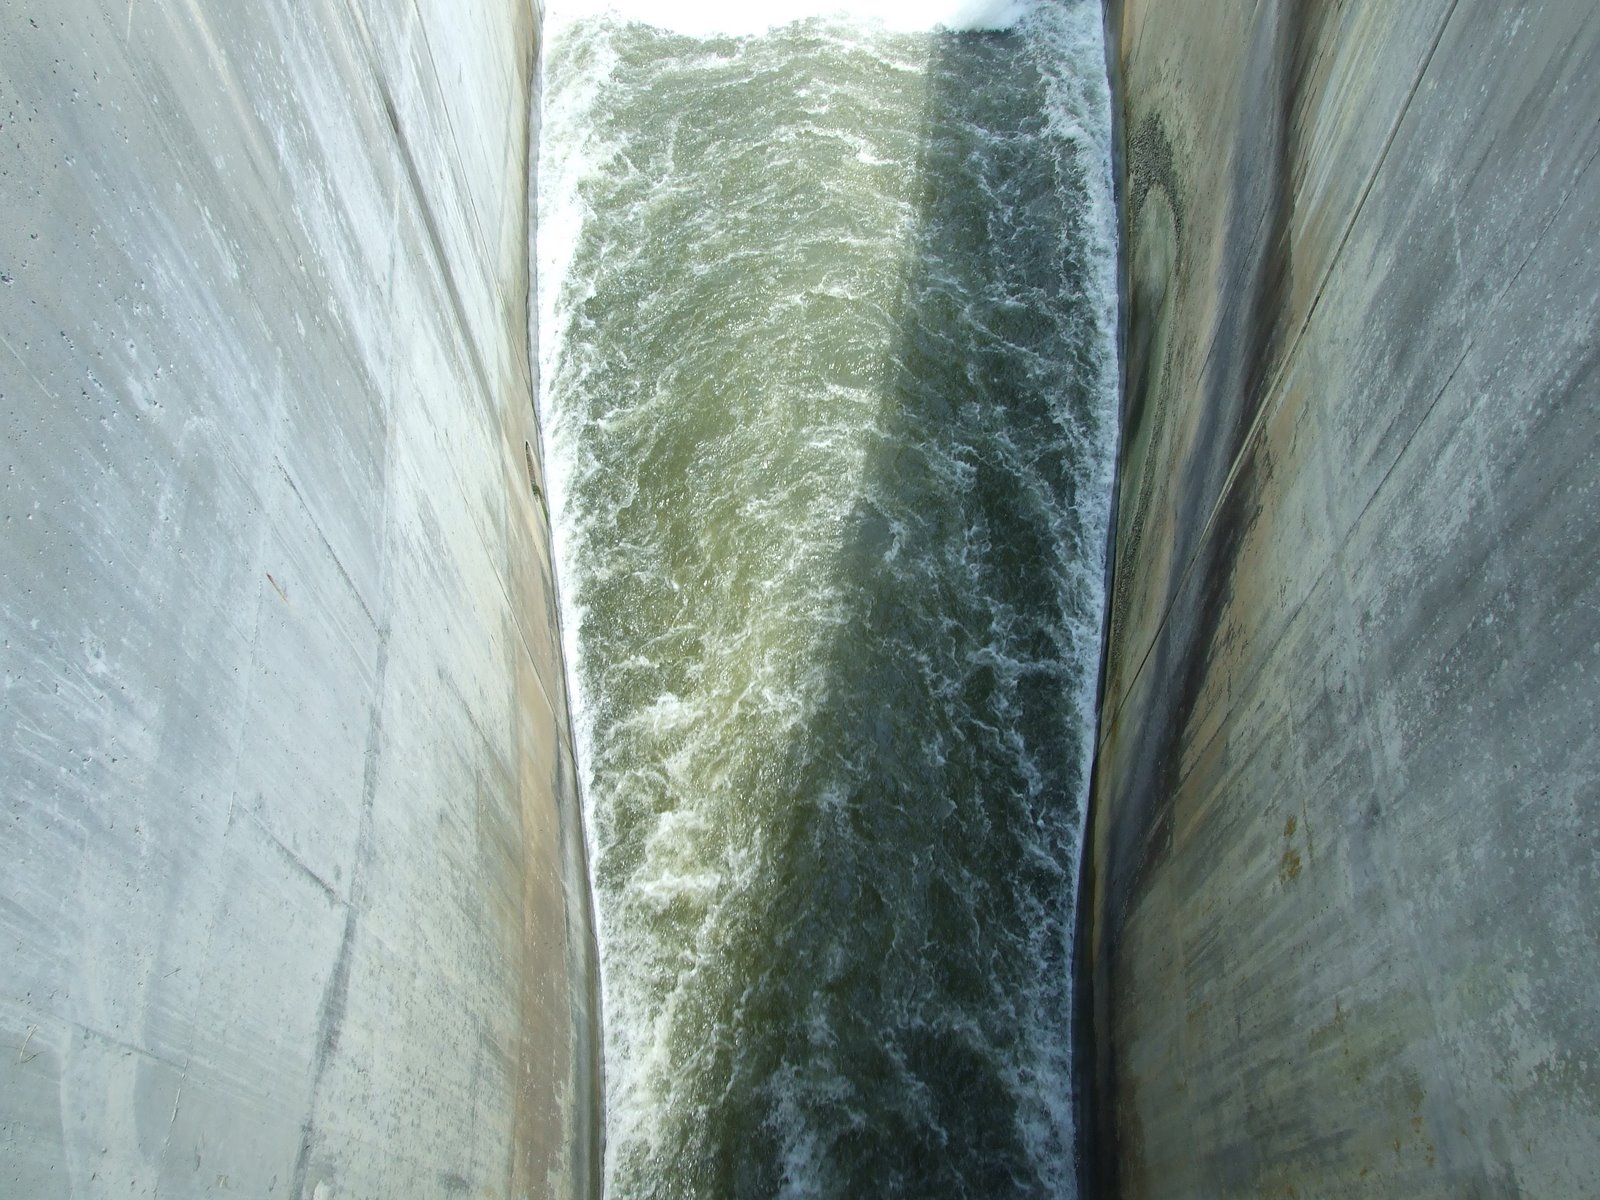 [Clinton+Lake+spillway+~+looking+down+from+above.jpg]